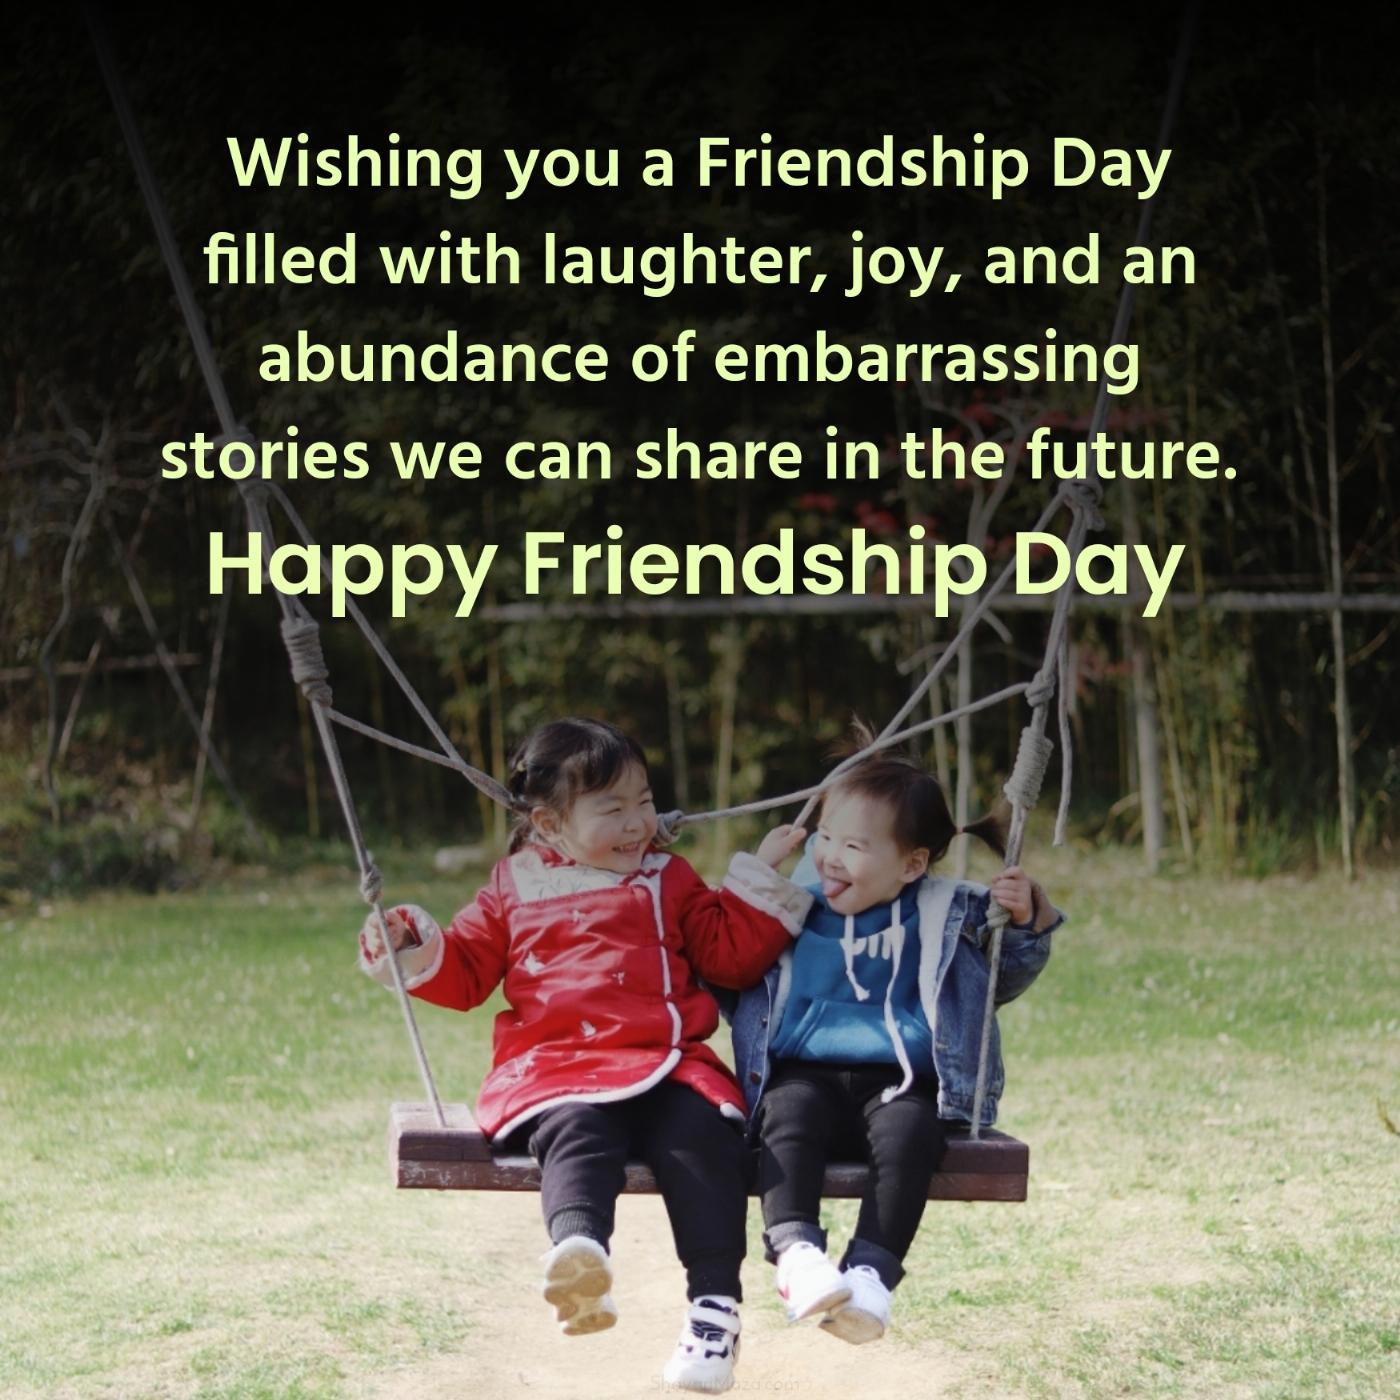 Wishing you a Friendship Day filled with laughter joy and an abundance of embarrassing stories